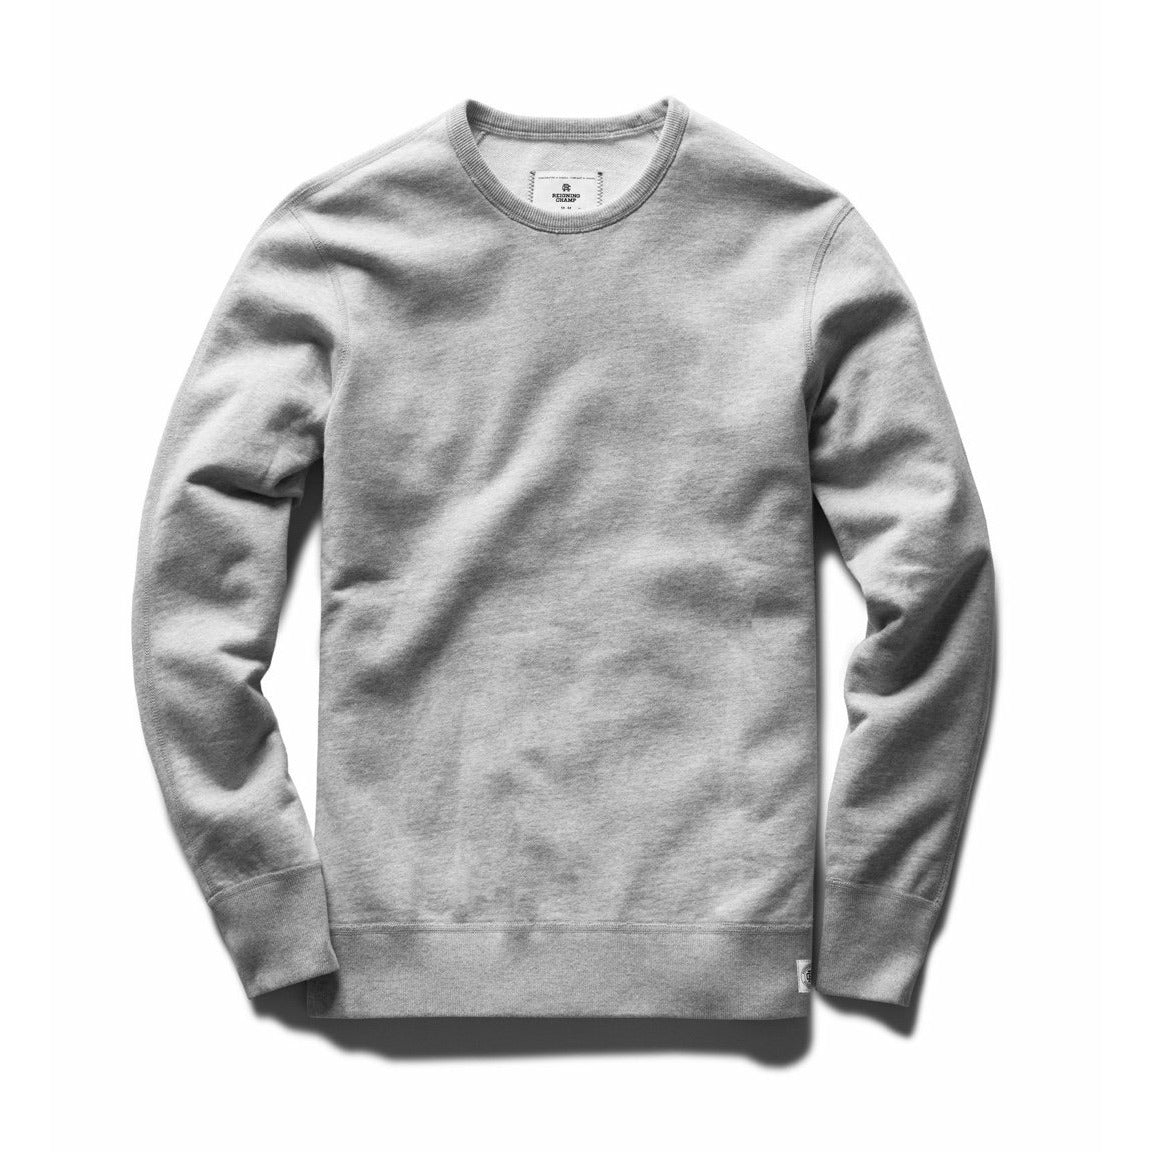 REIGNING CHAMP midweight core crew